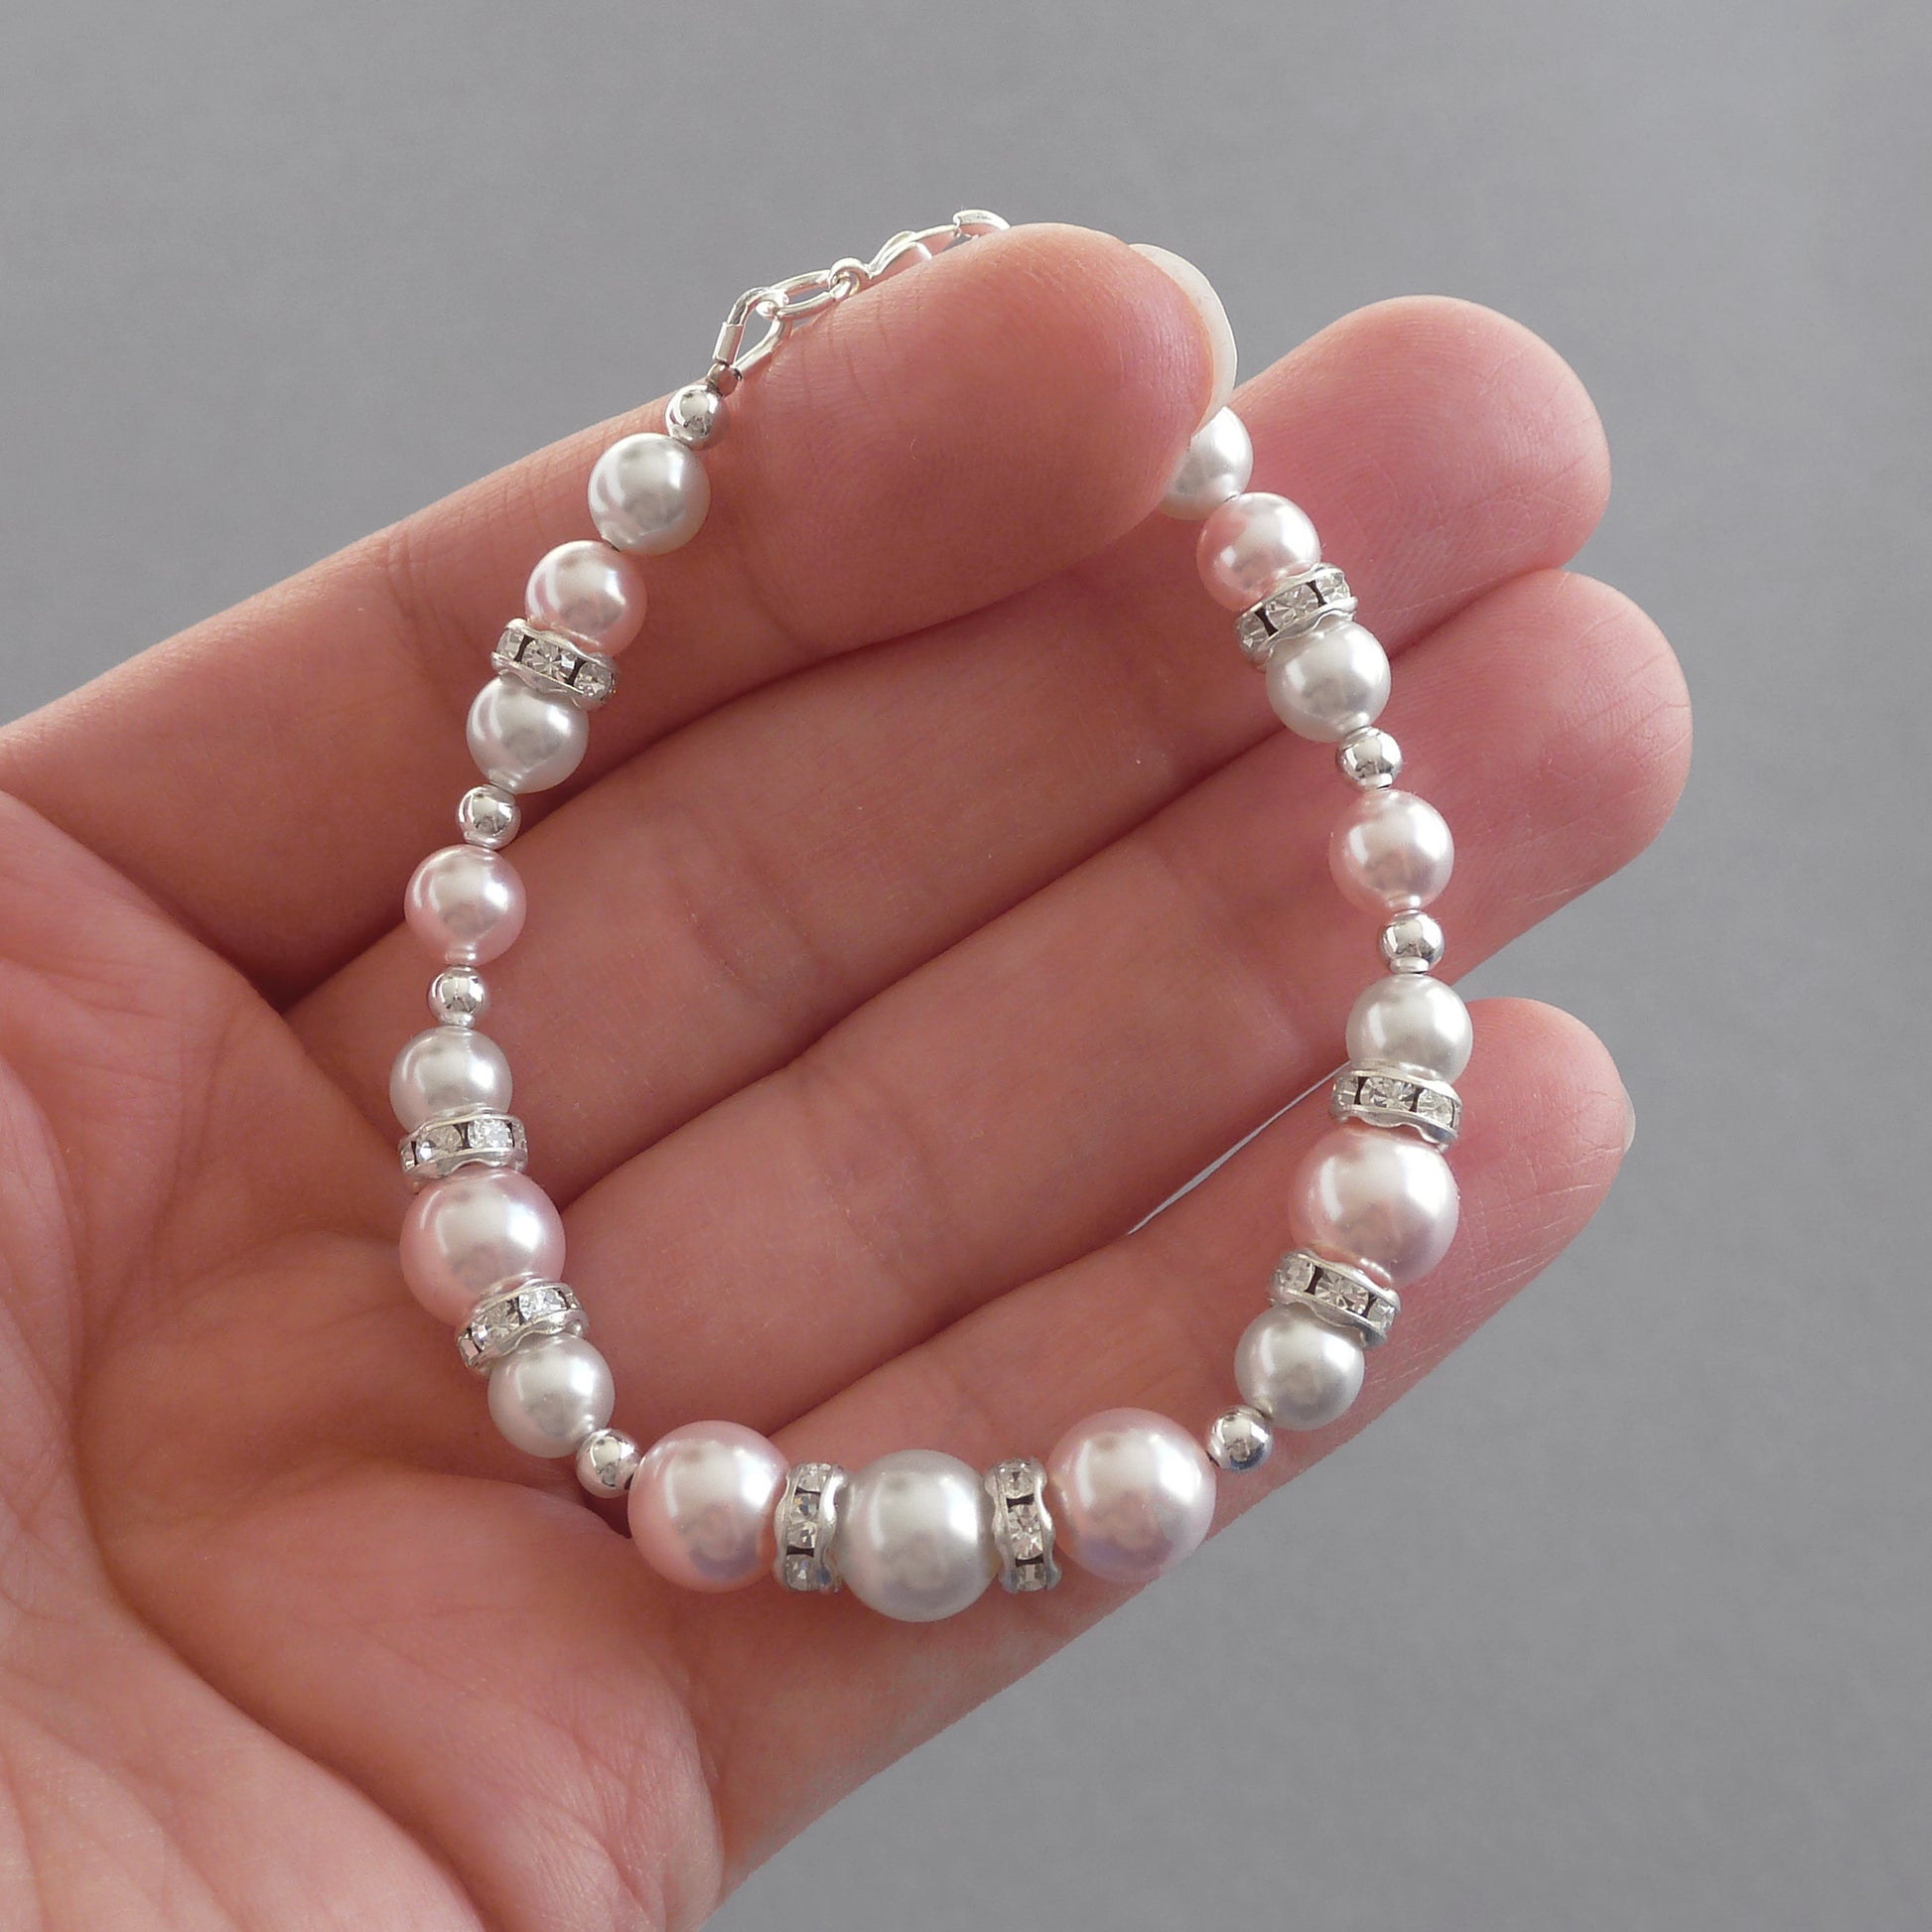 Blush pink and white pearl bracelet